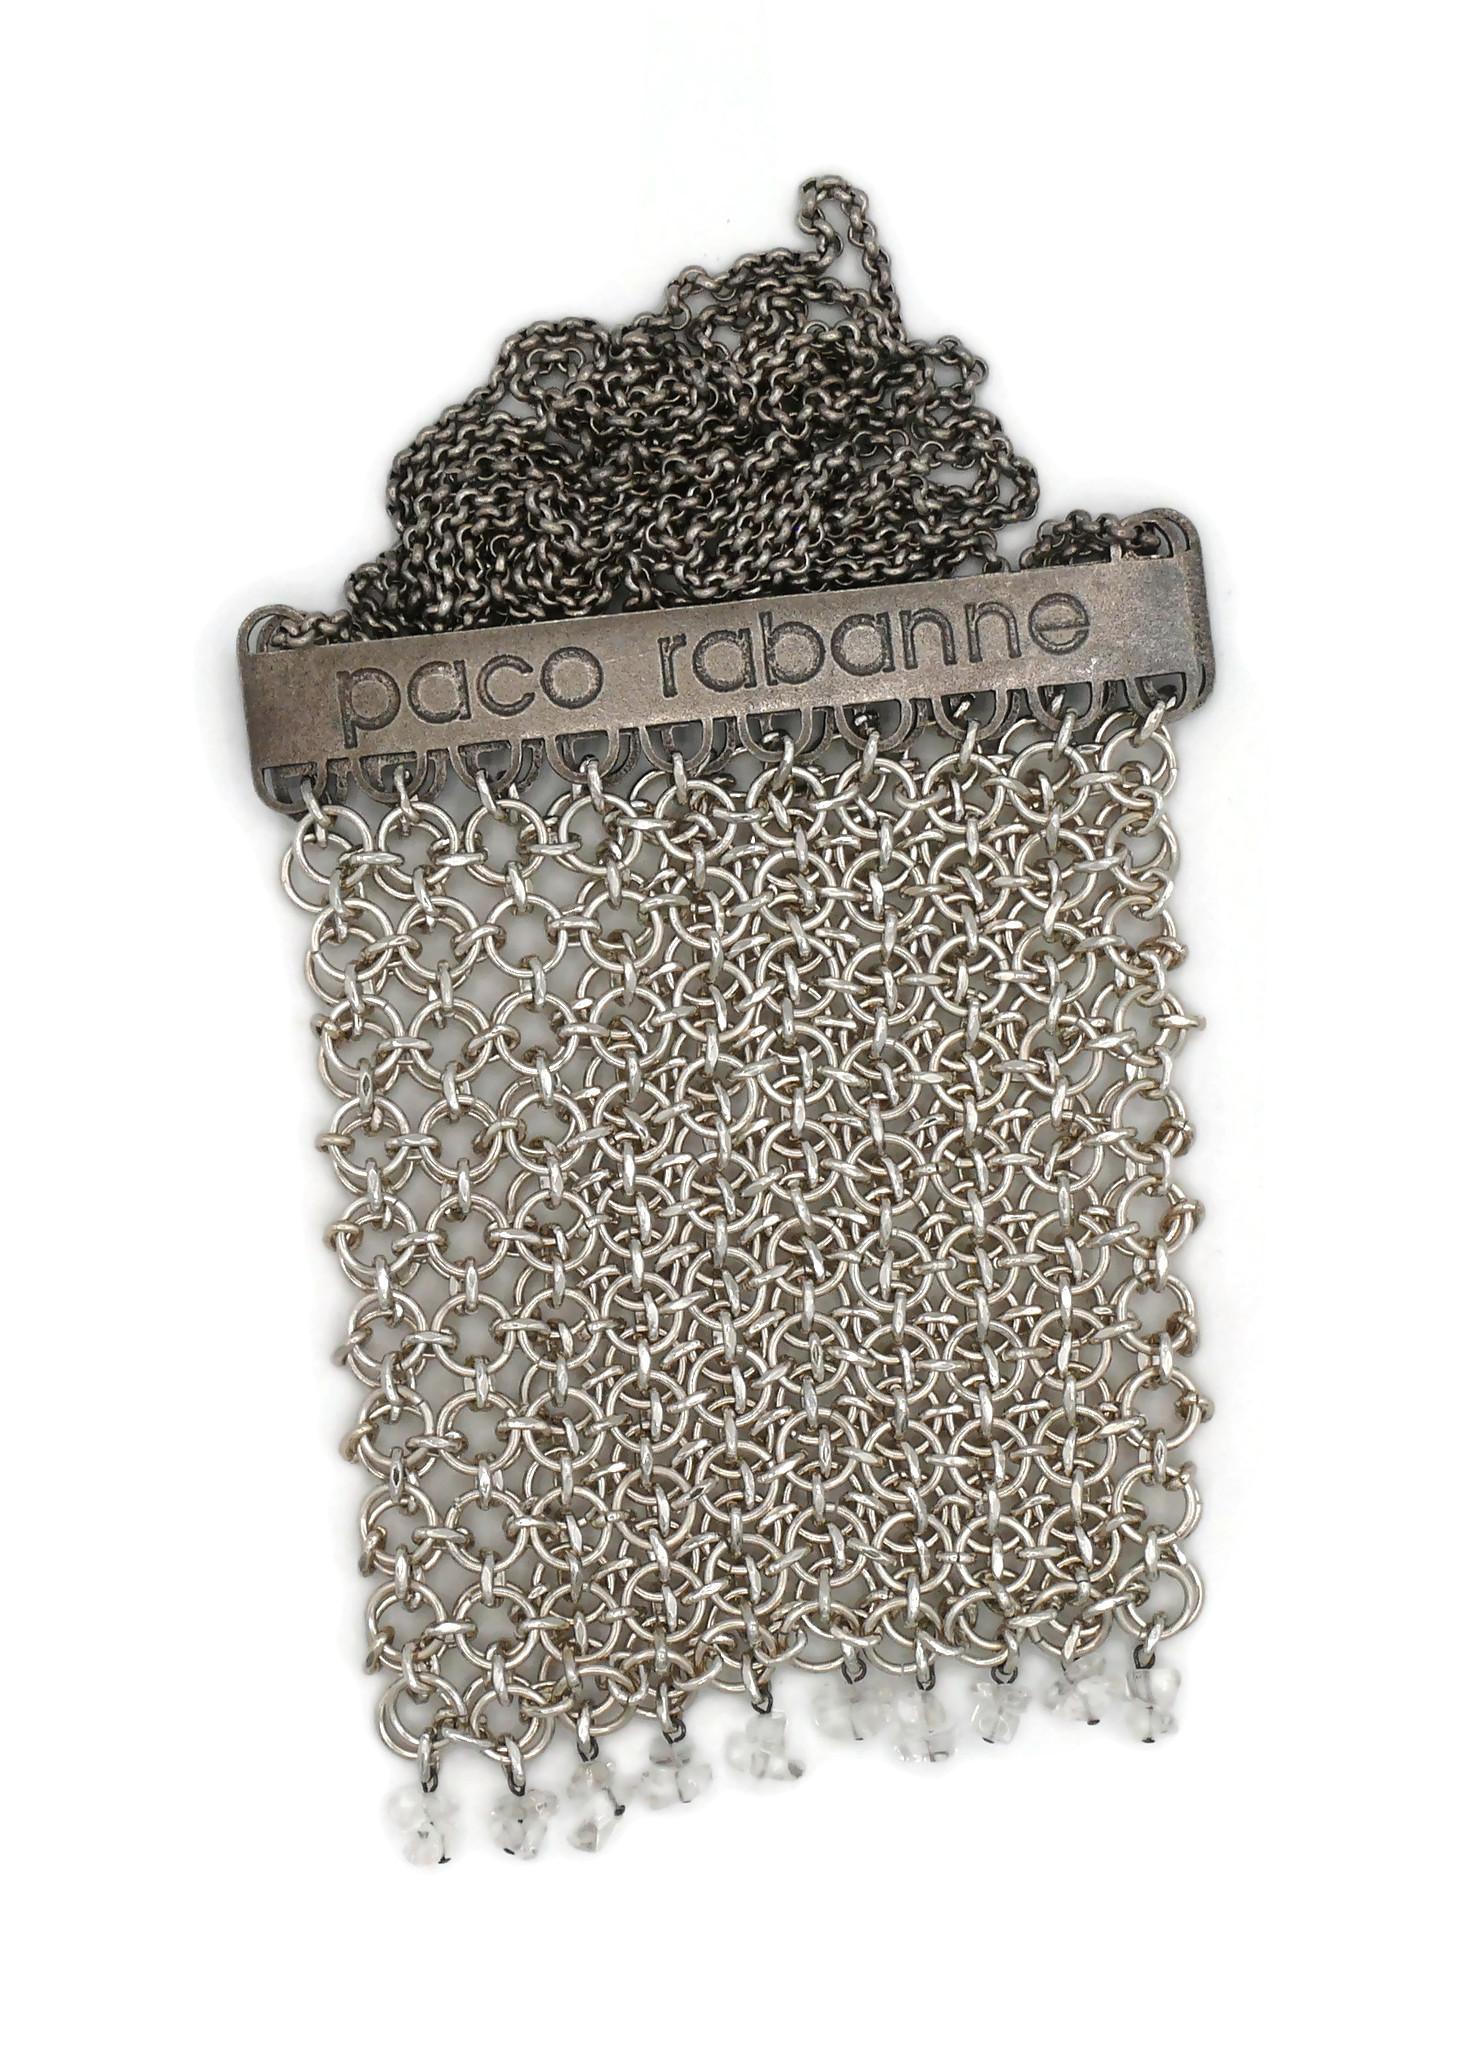 PACO RABANNE Vintage Mini Silver Tone Chainmail Messenger Bag For Sale 2